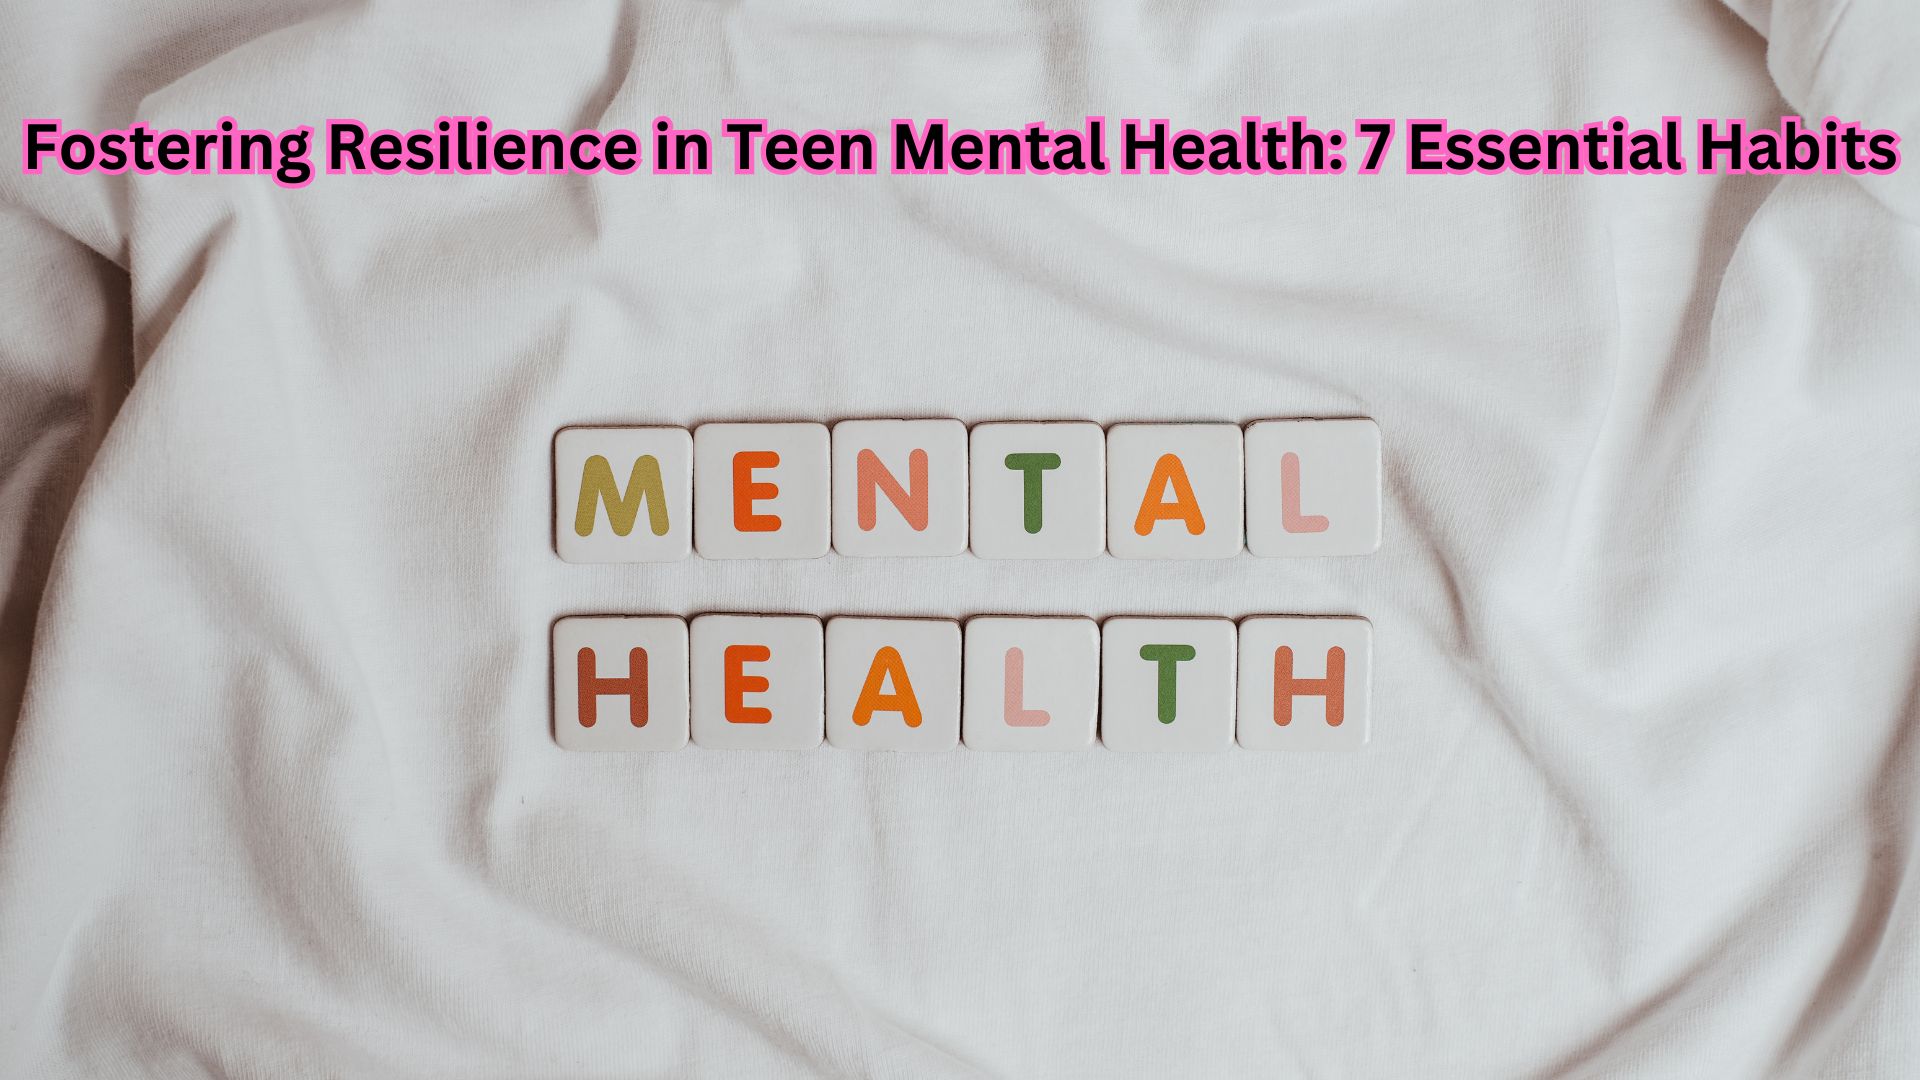 Fostering Resilience in Teen Mental Health: 7 Essential Habits